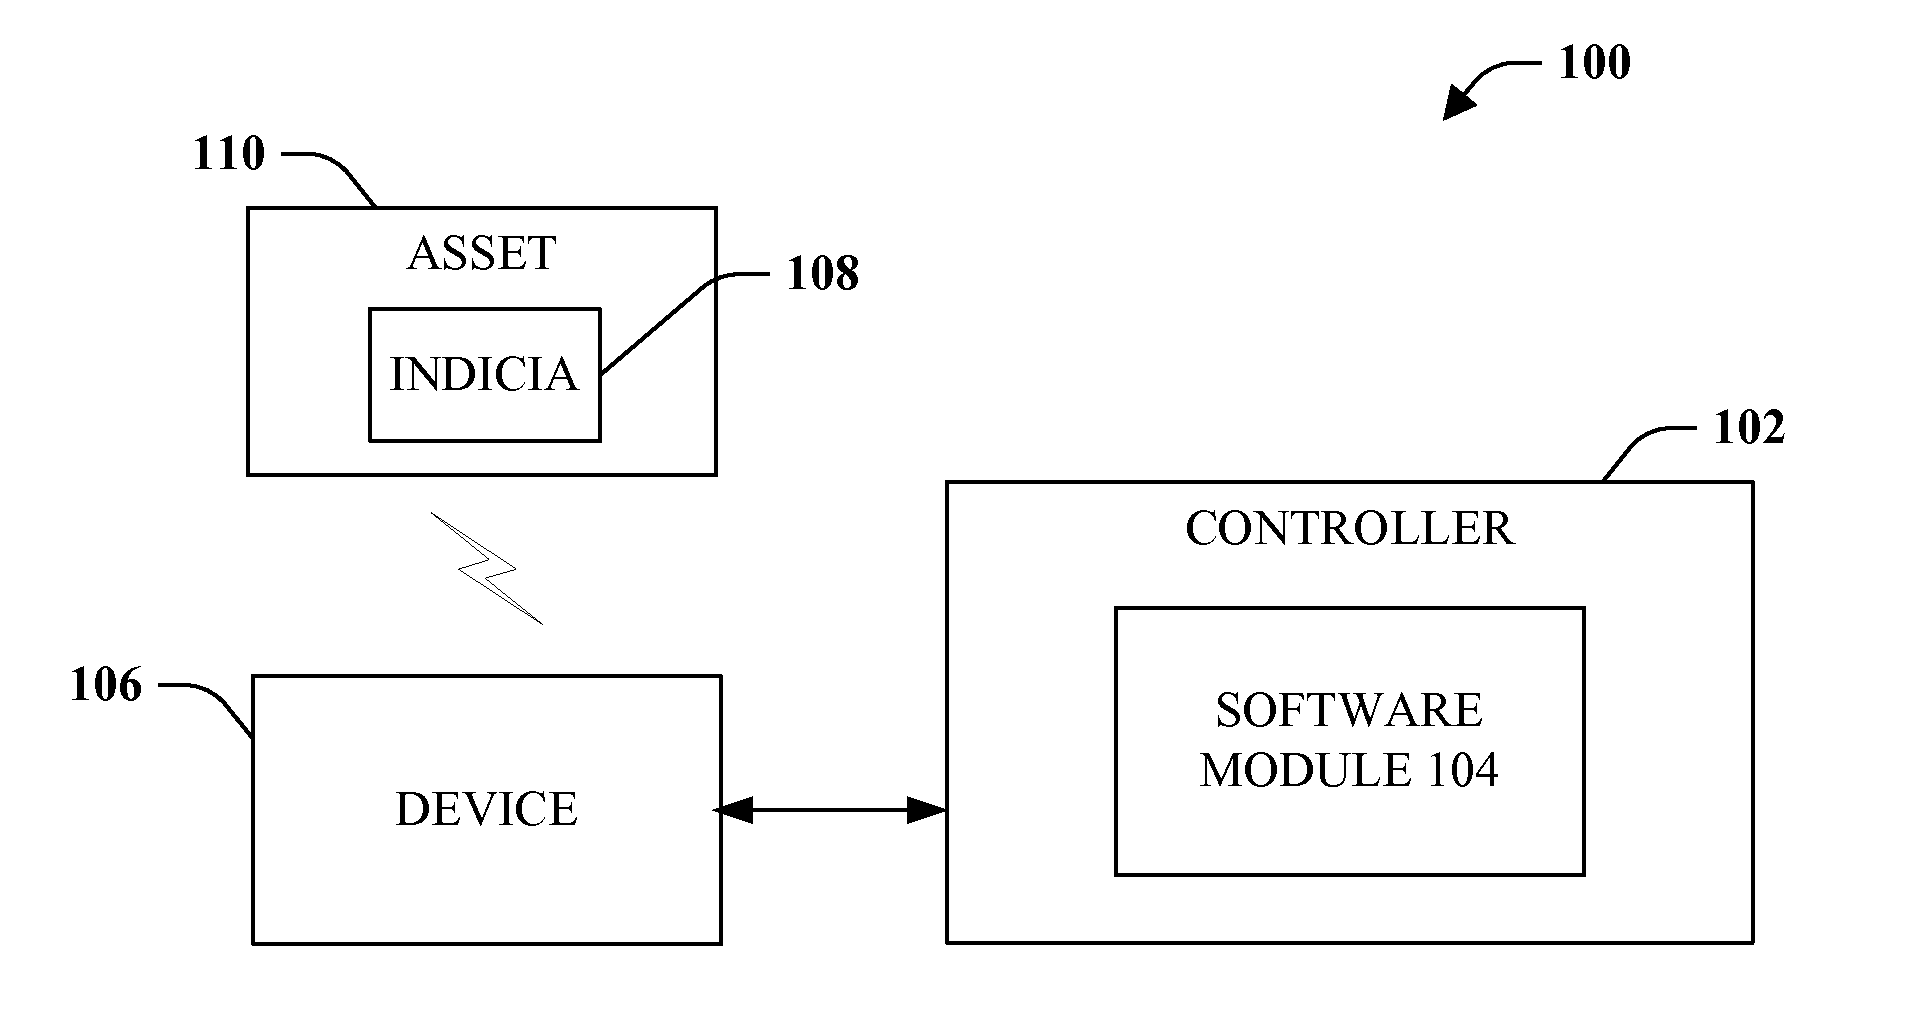 System and method of image analysis for automated asset identification